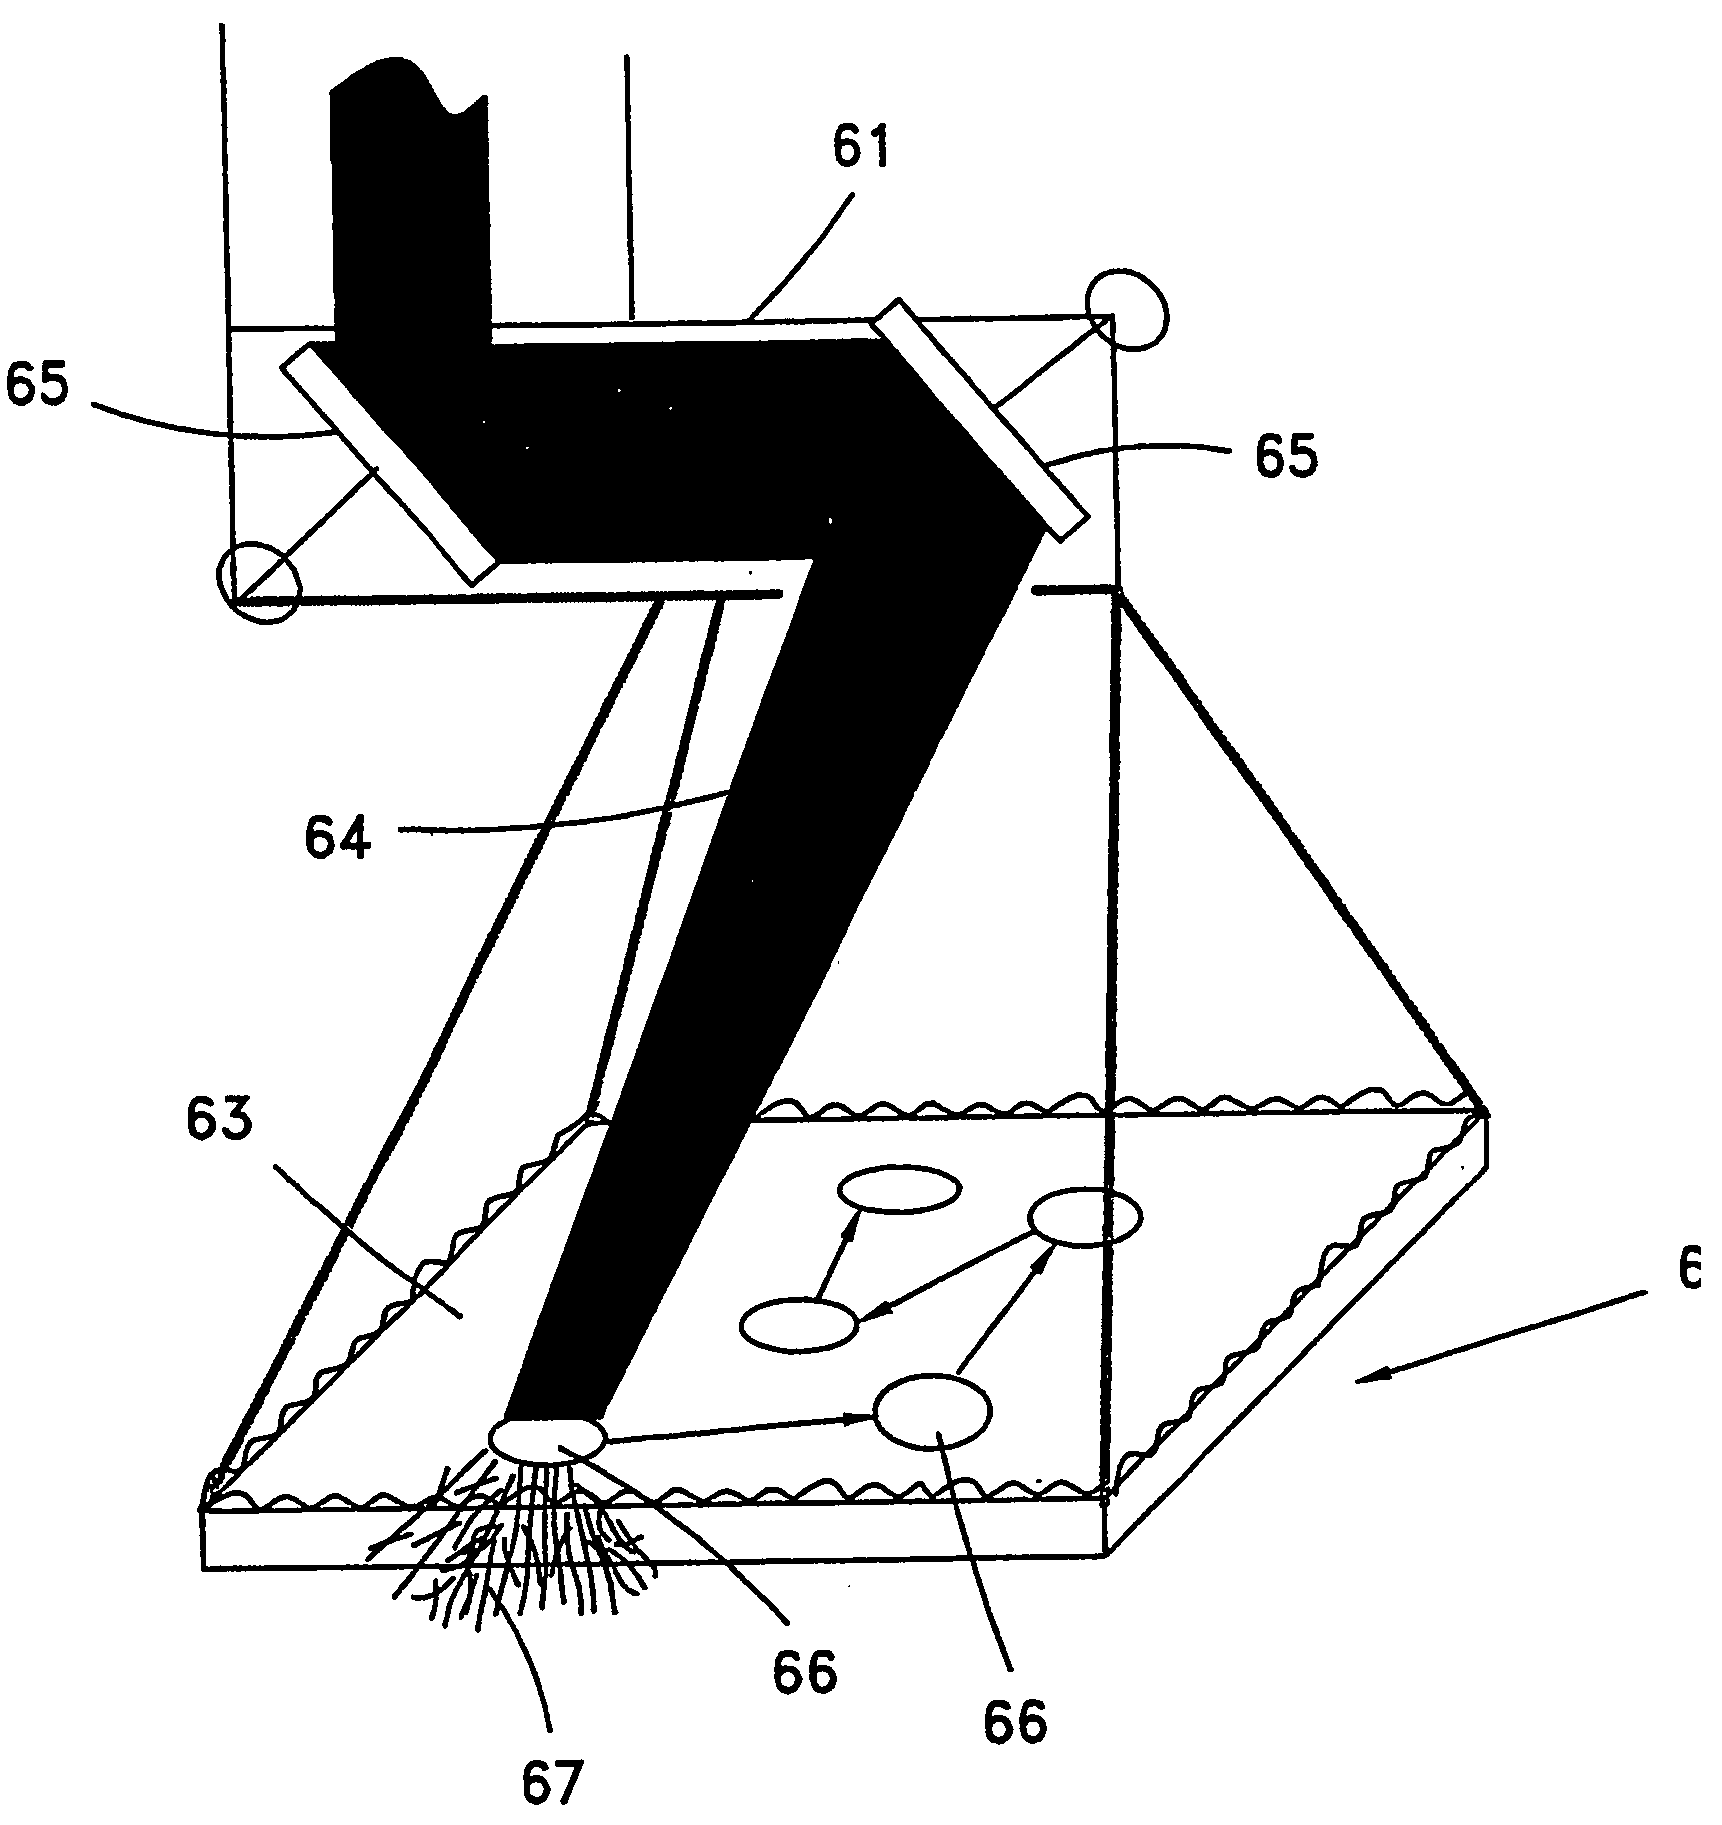 Method and apparatus for improving safety during exposure to a monochromatic light source